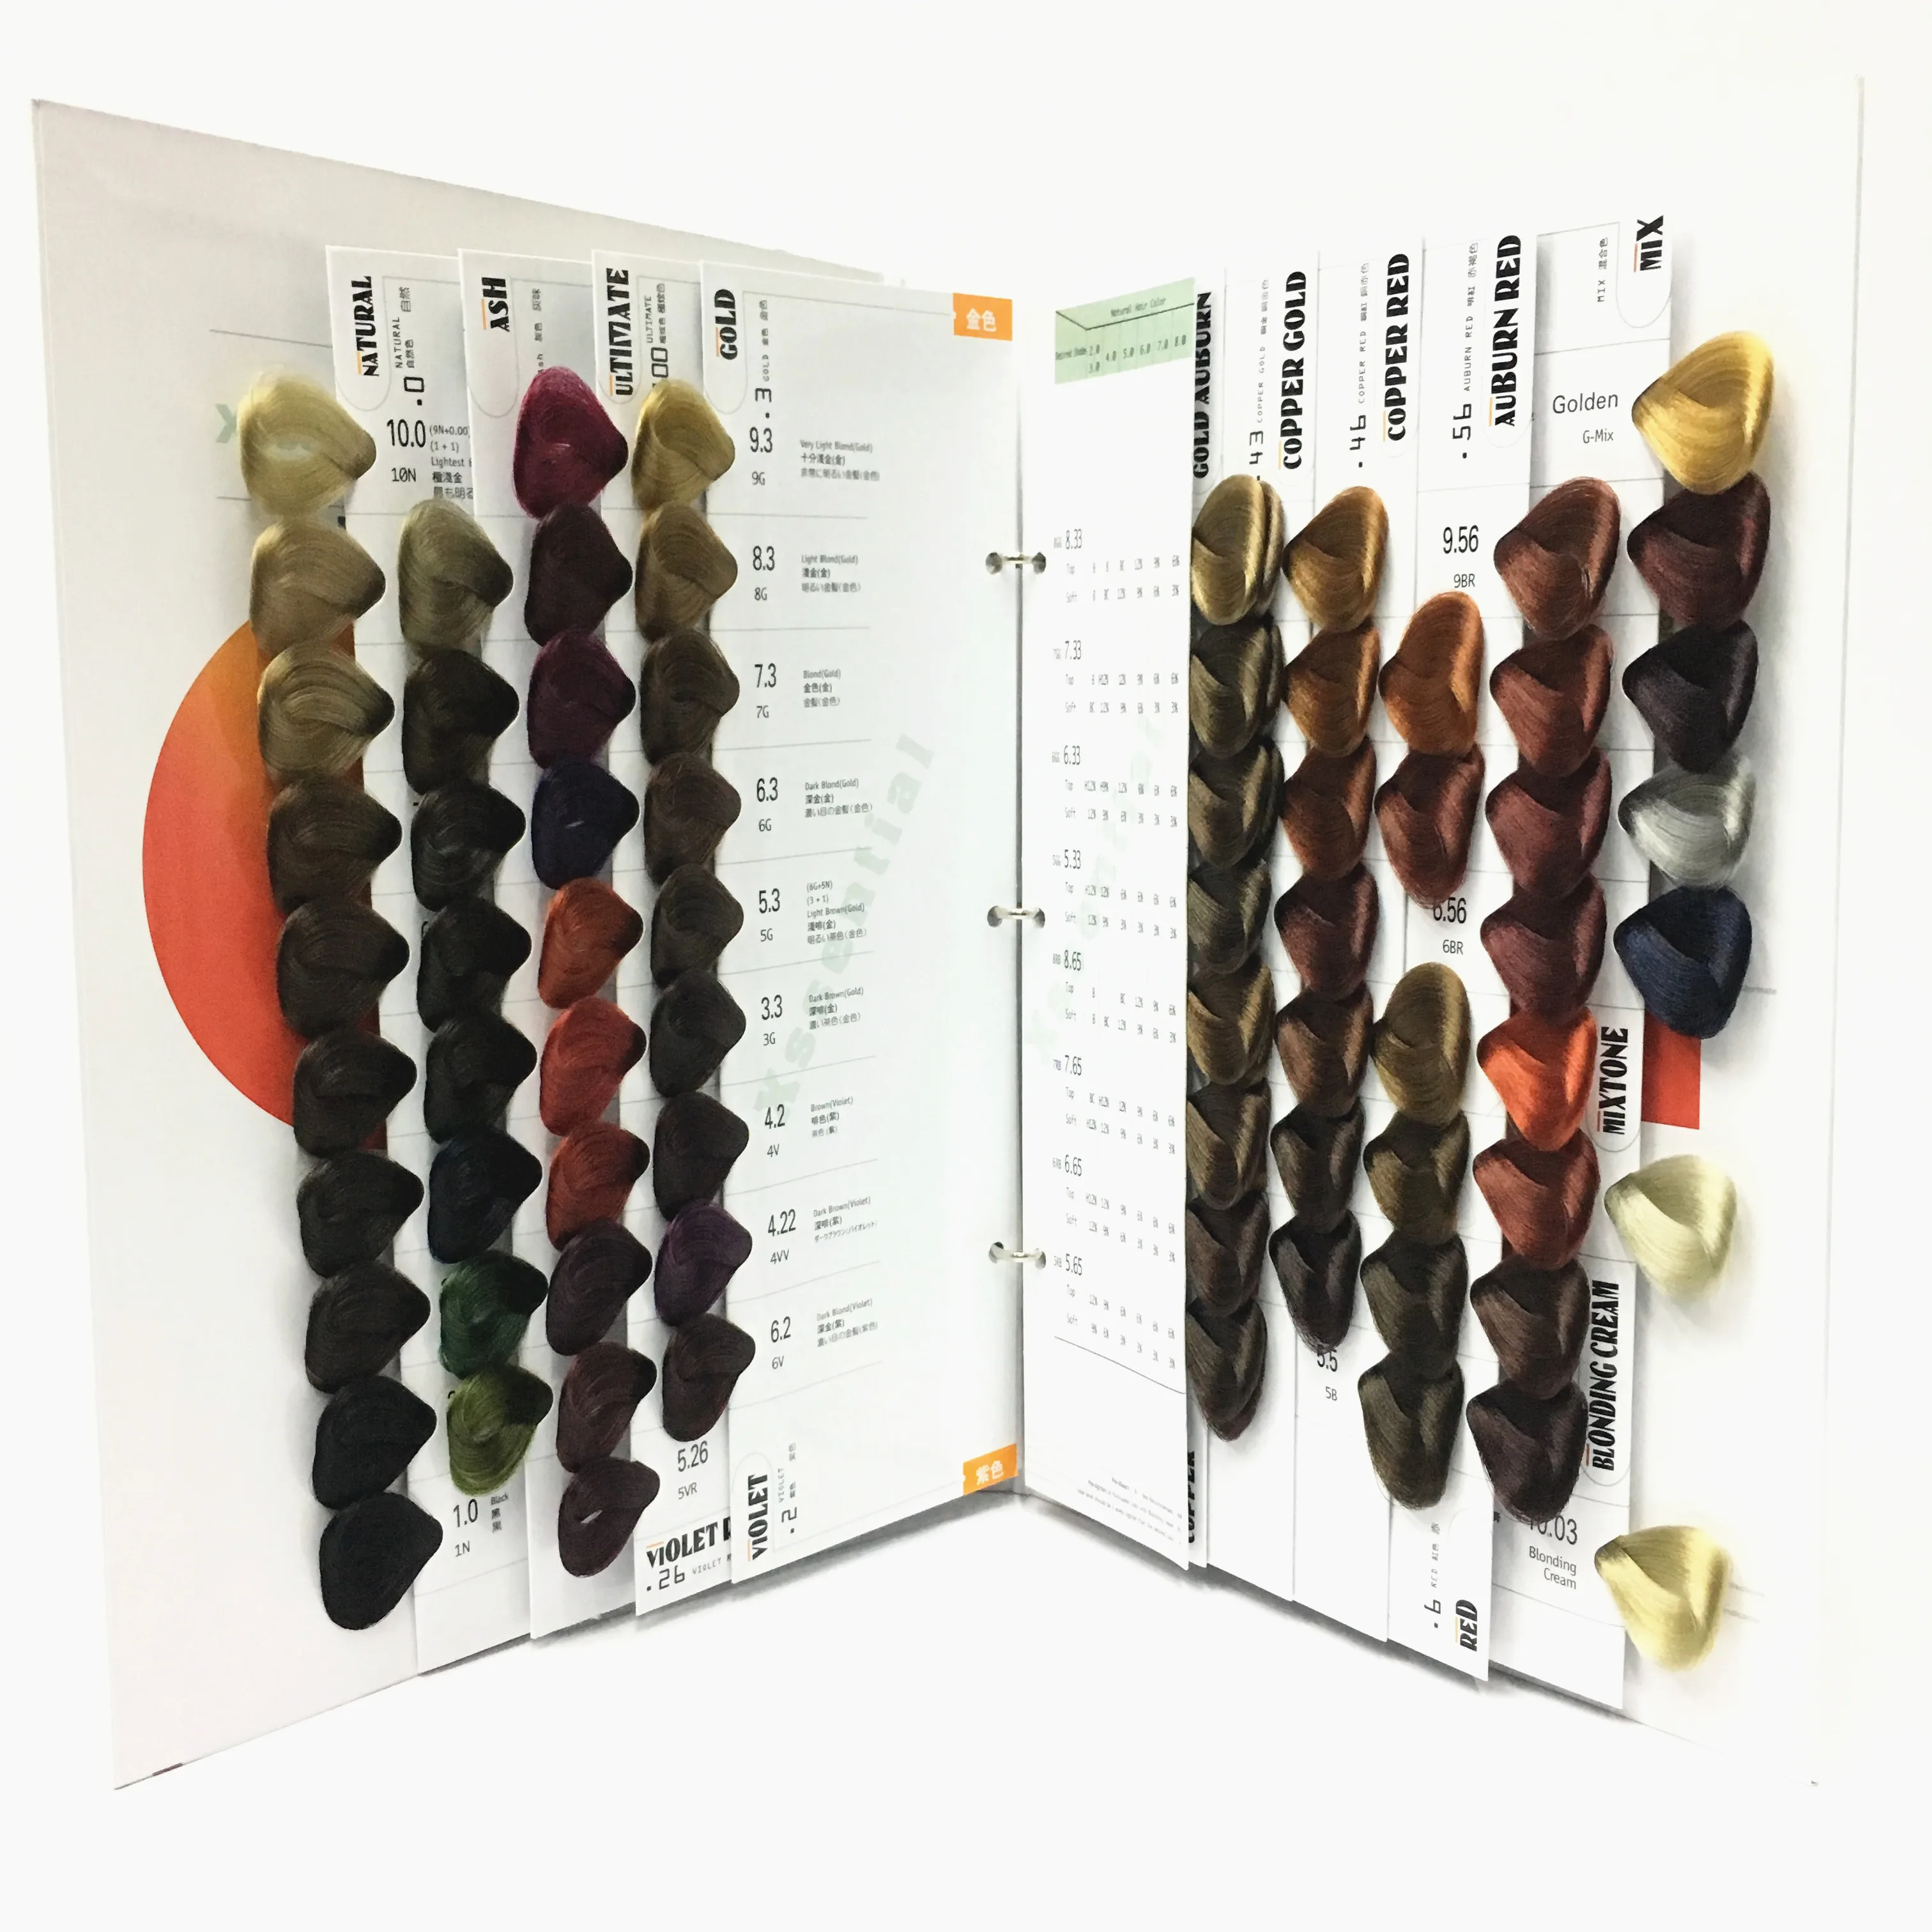 Oem Loose Leaf Hair Level Swatch Book Hair Color Catalog - Buy Hair Colour  Chart Professional,Redken Hair Swatch Book,Garnier Hair Color Catalogue  Product on Alibaba.com